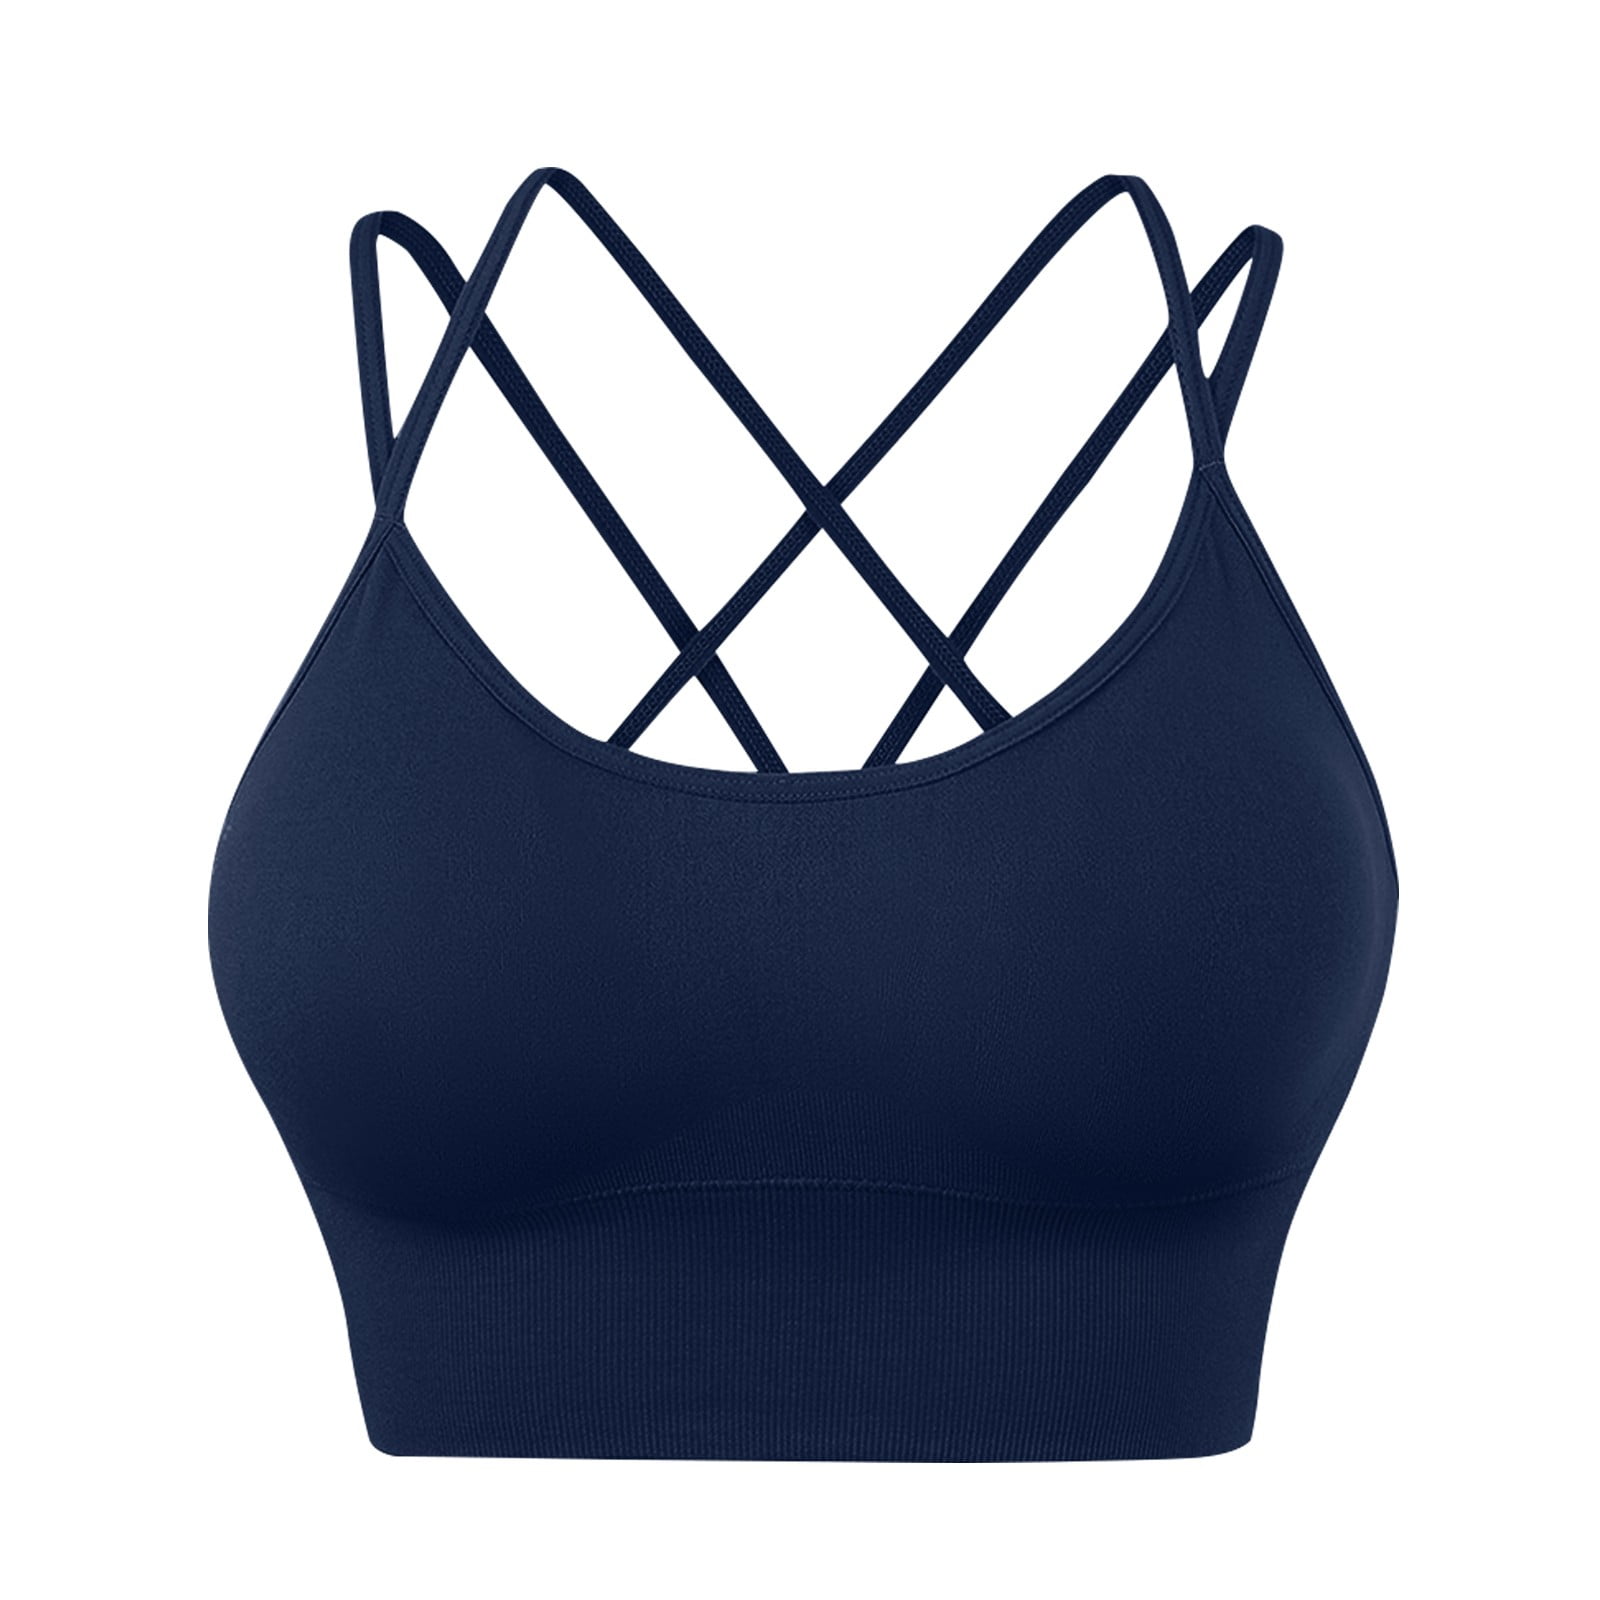 LowProfile Workout Sports Bra for Womens Plus Size Cross Back Padded  Strappy Criss Cross Cropped Fitness Yoga Bras Navy Blue L 